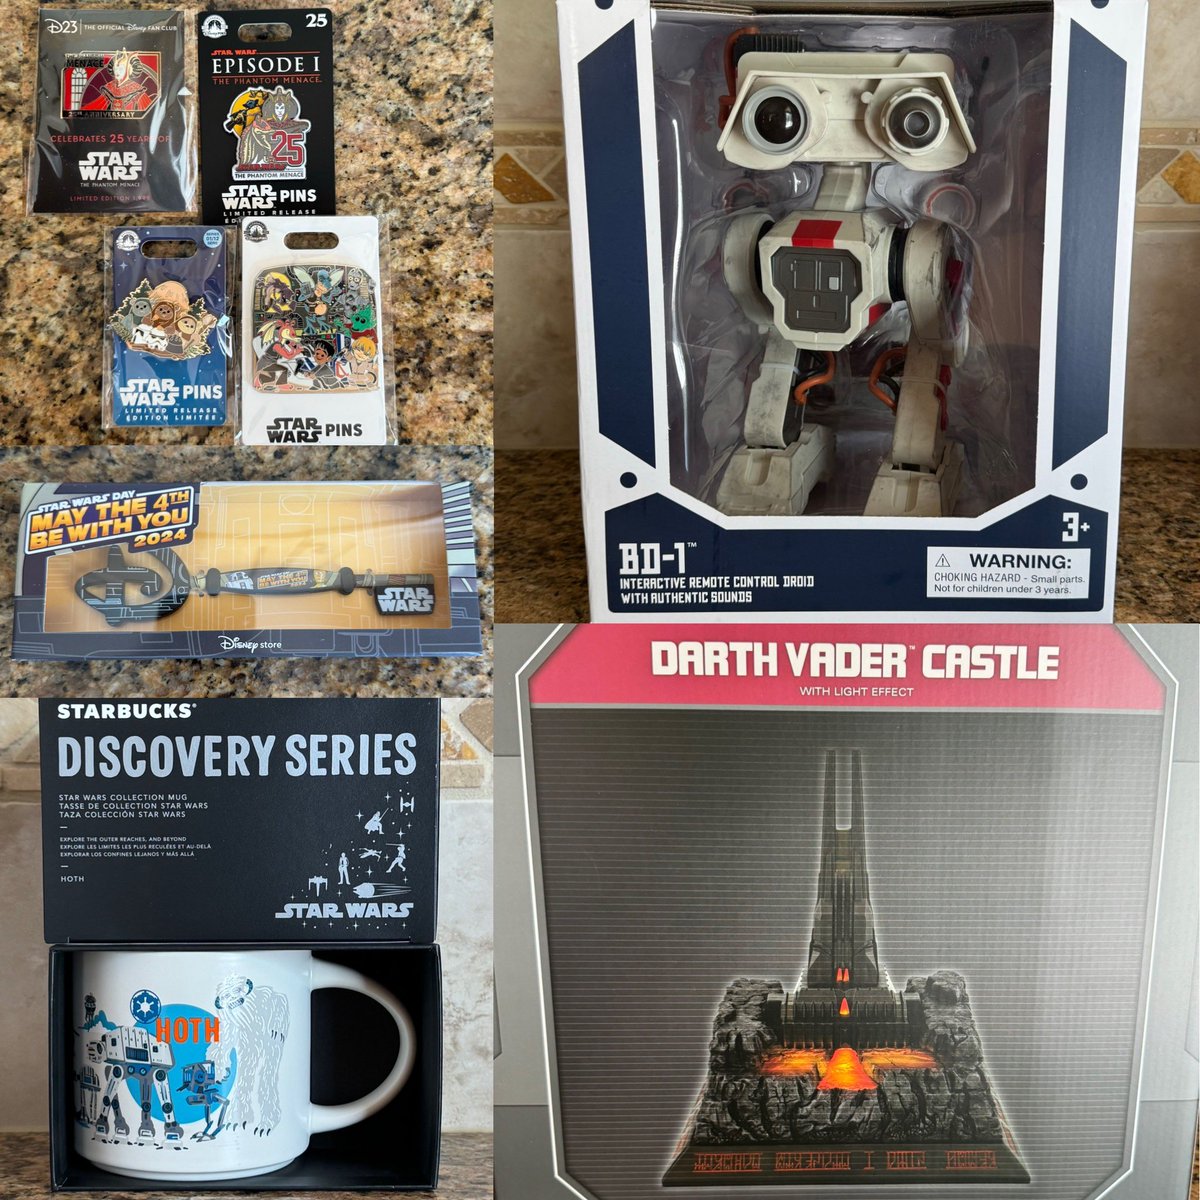 📭📦 Got my Star Wars May the 4th releases from the Disney Store! . #Disney #DisneyParks #DisneyStore #ShopDisney #StarWars #ThePhantomMenace #Maythe4thBeWithYou #Maythe4th #Droid #DarthVader #Pin #Pins #DisneyPins #DisneyPinTrading #Starbucks #Collectibles #DisTrackers